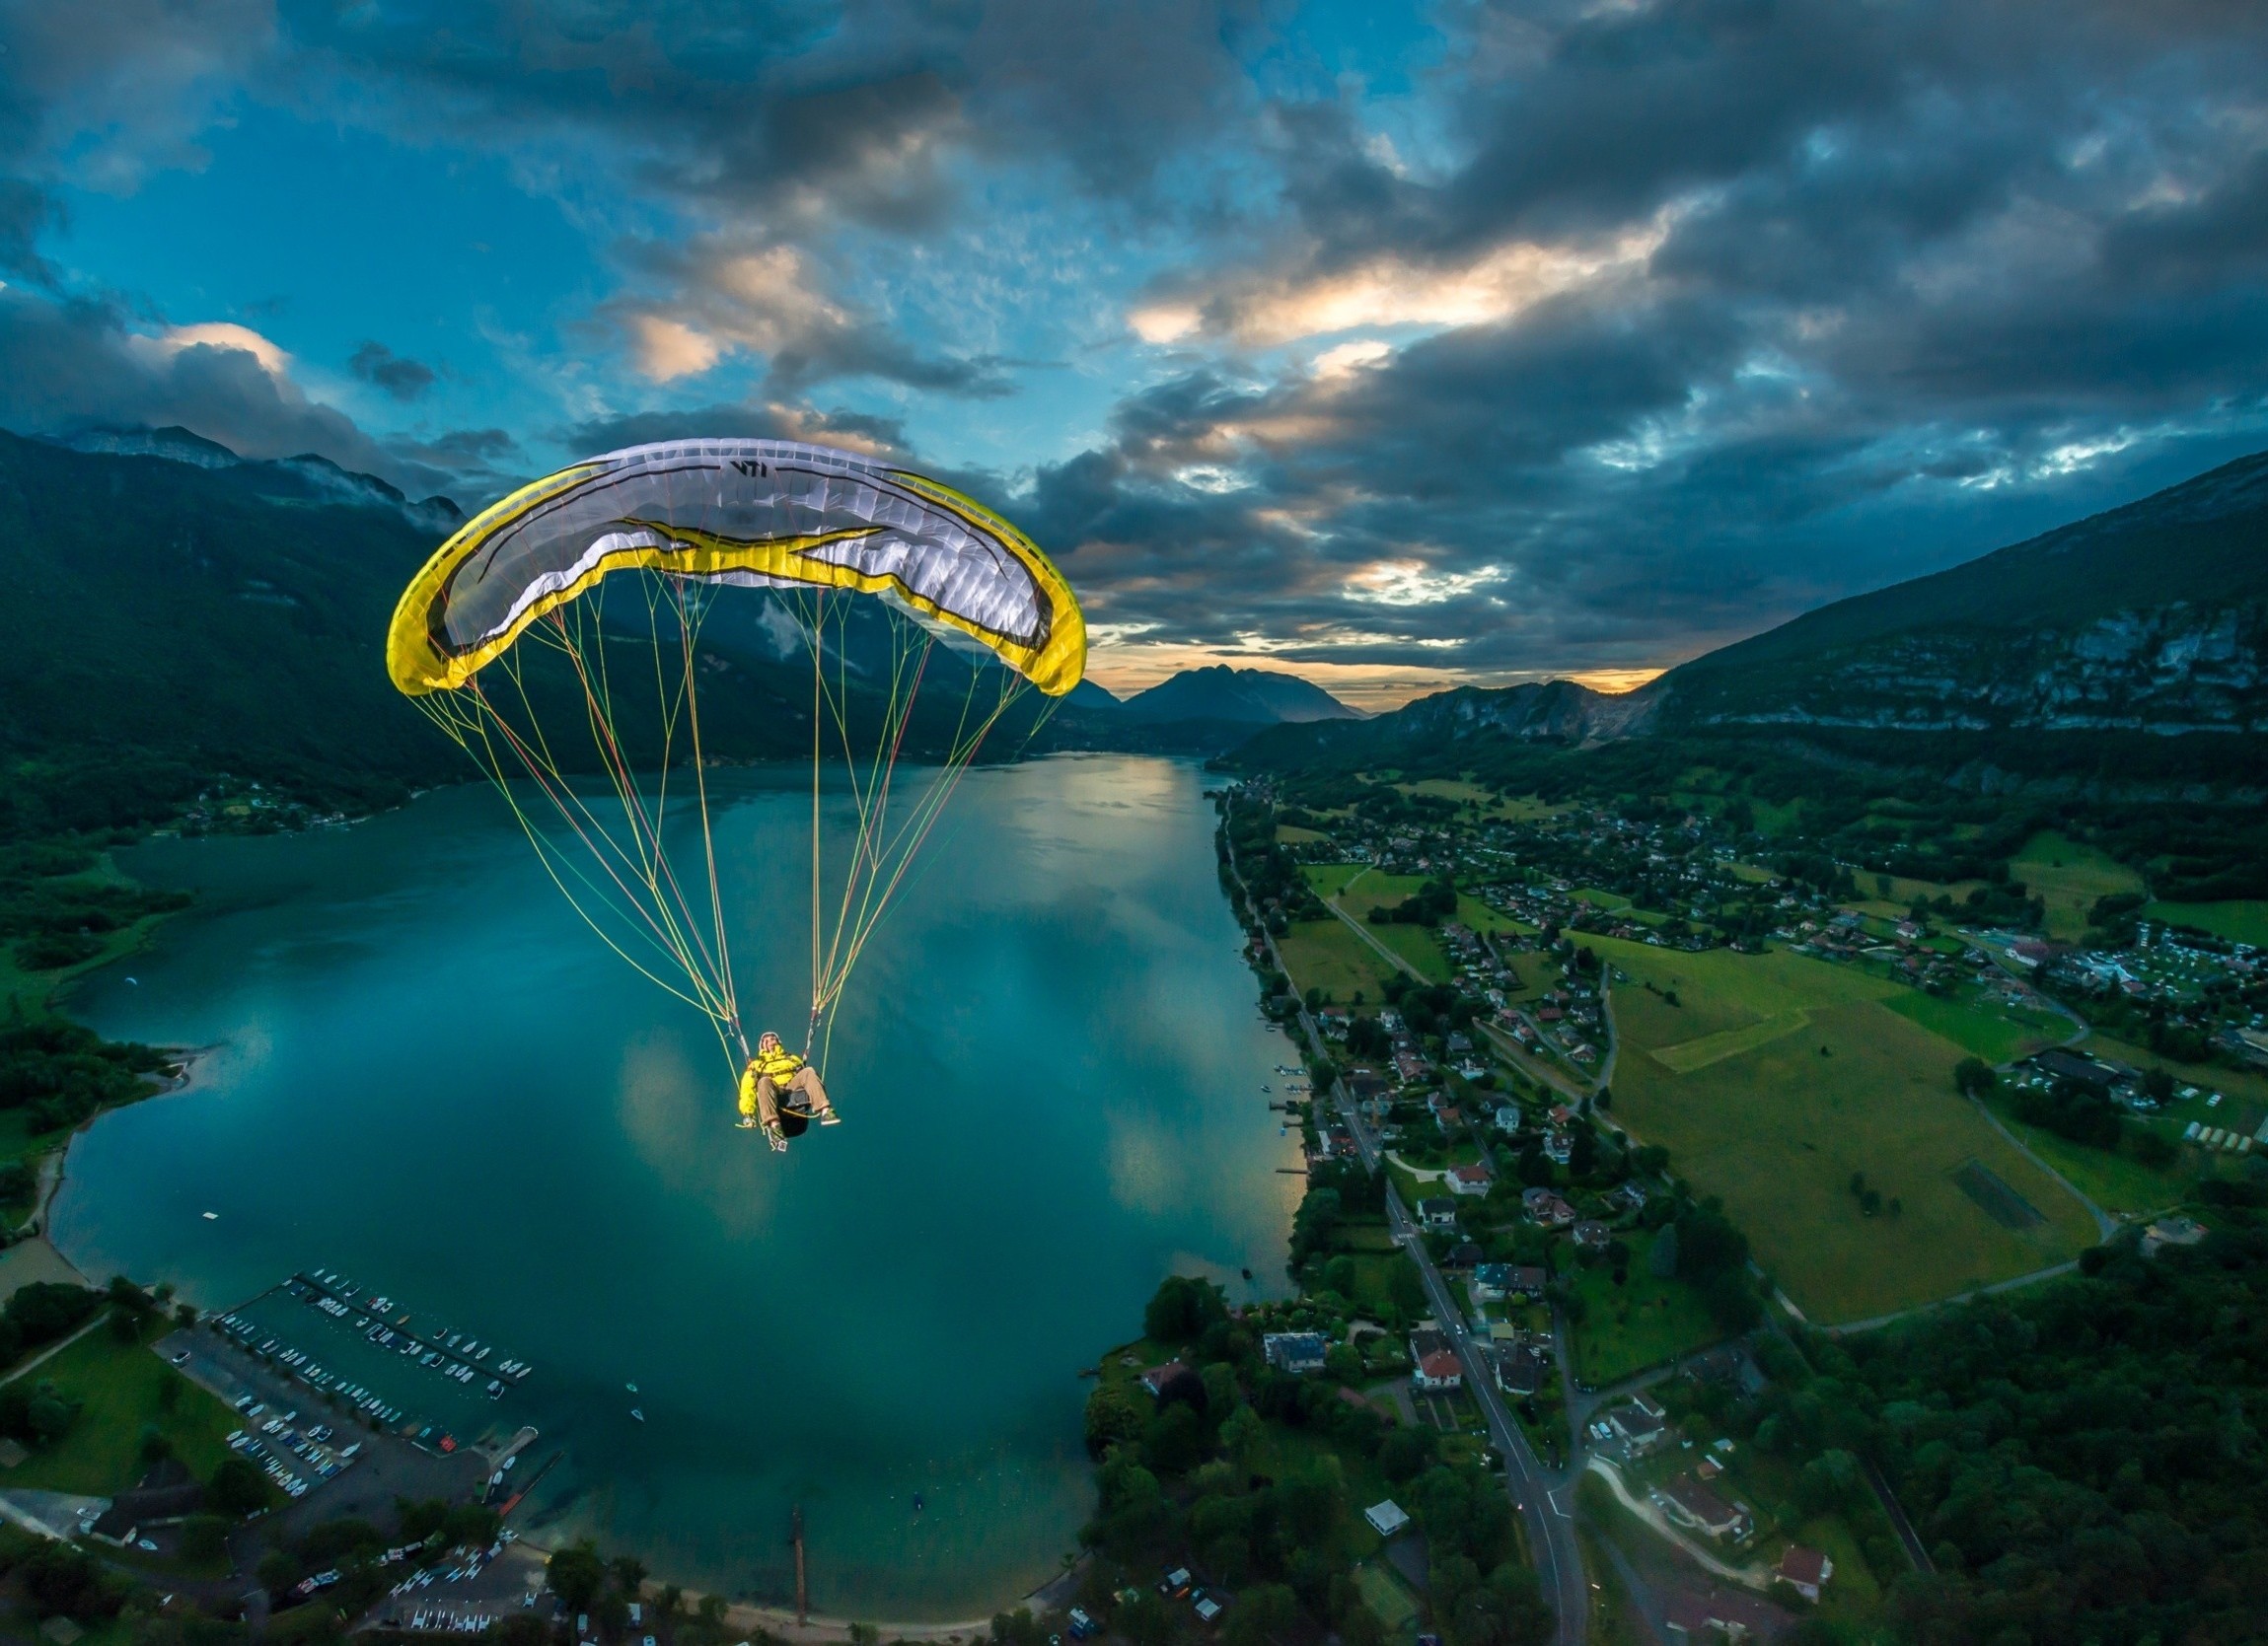 Wallpaper, landscape, sunset, city, lake, nature, reflection, sky, field, clouds, flying, France, paragliding, mountain, parachute, screenshot, computer wallpaper, atmosphere of earth, aerial photography, extreme sport, parachuting, windsports, air